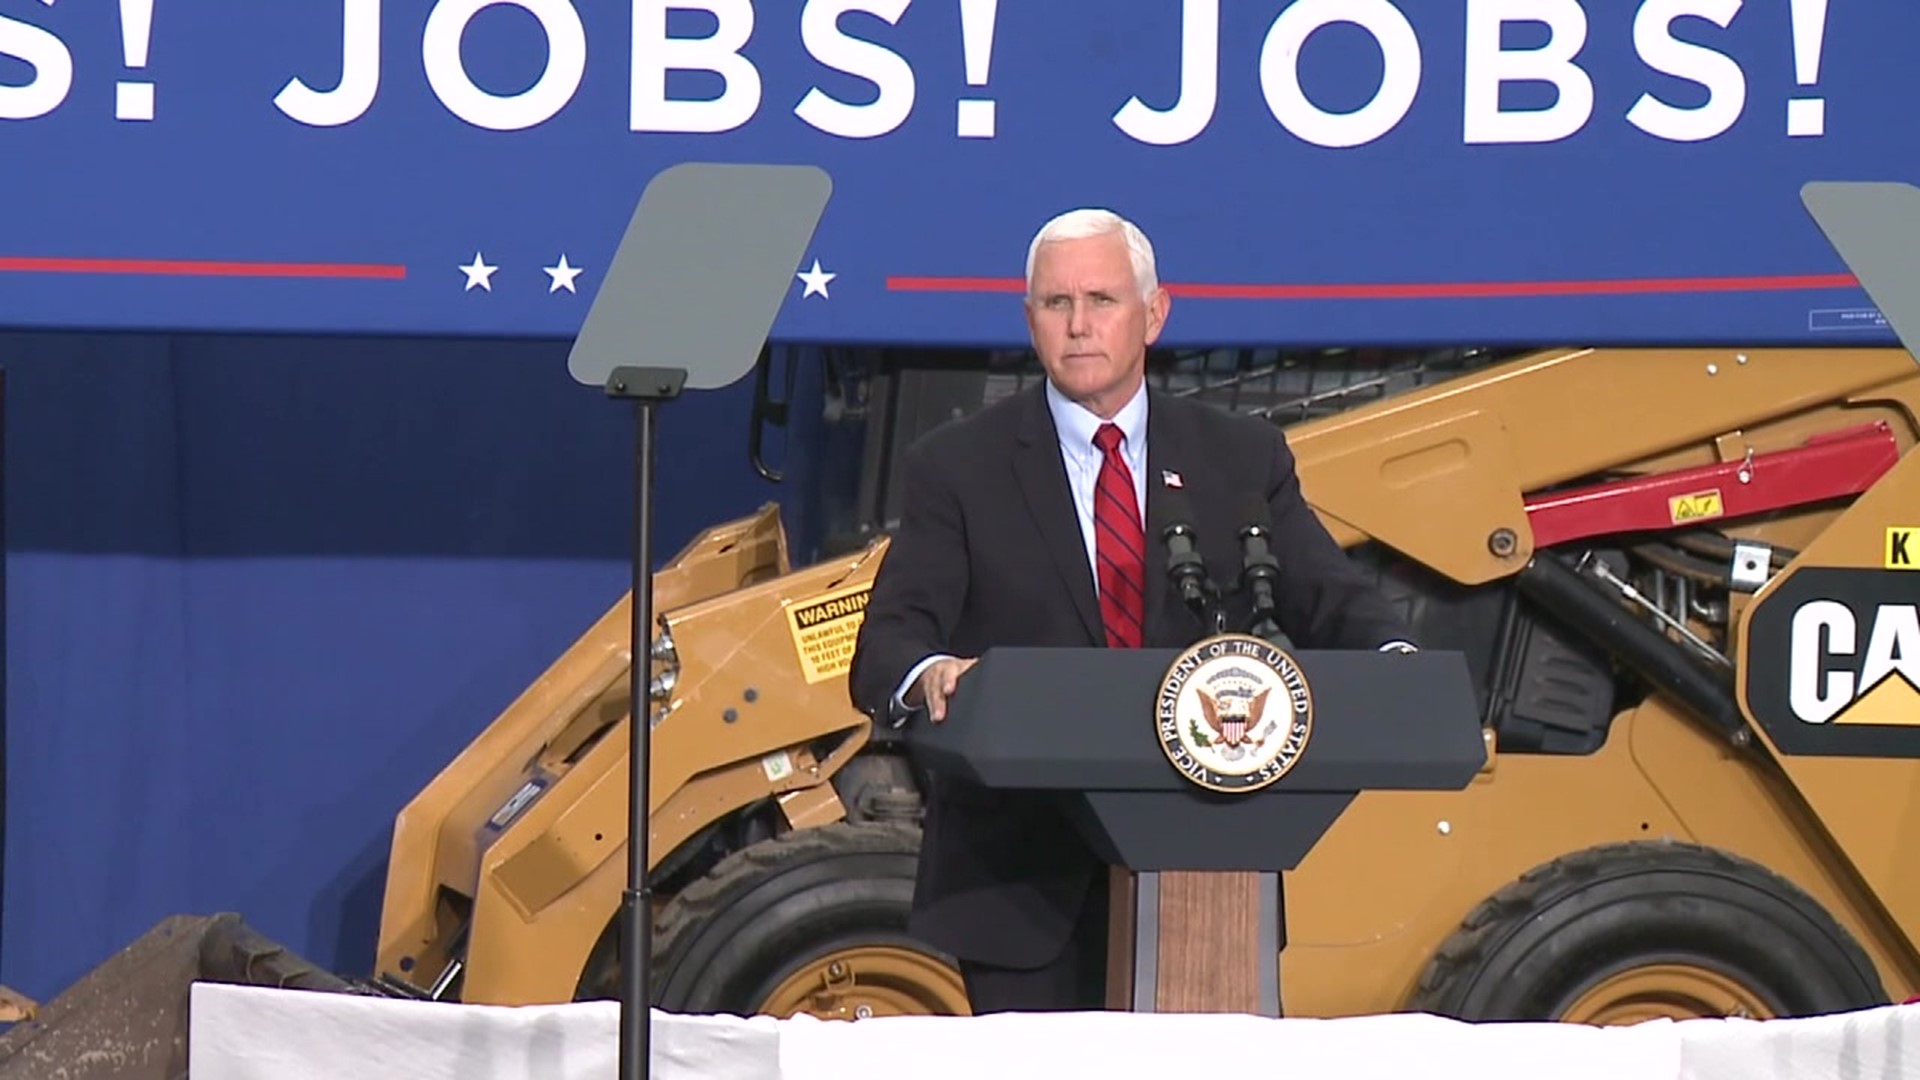 Vice President Mike Pence spoke to supporters at a rally at Kuharchik Construction.